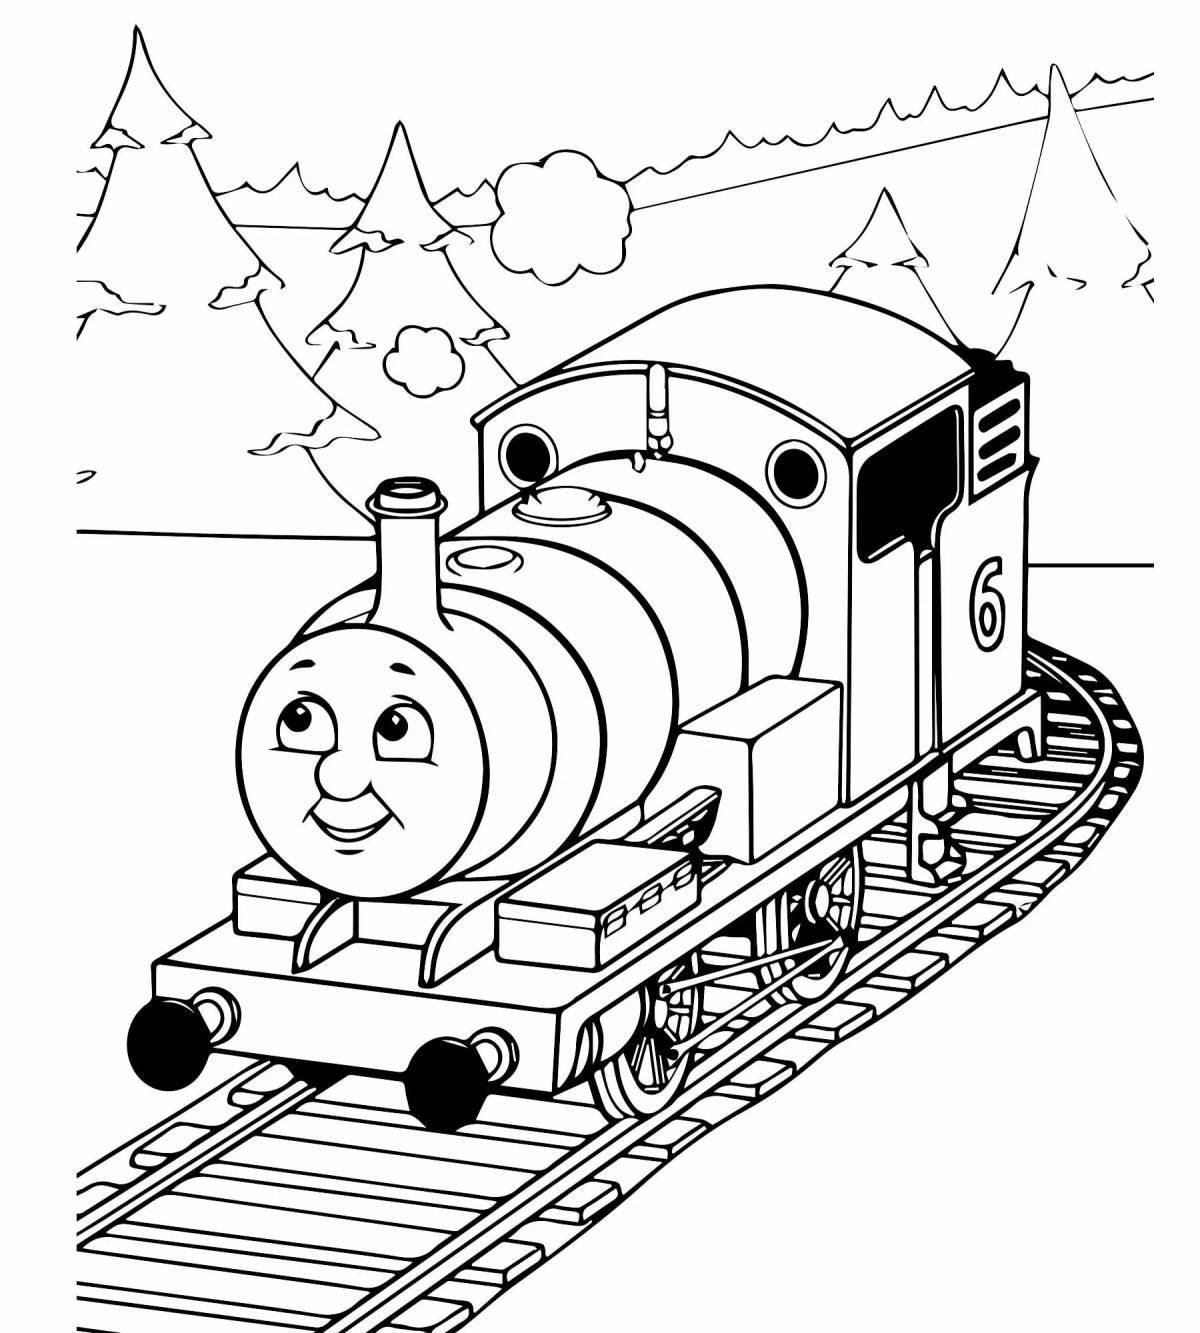 Coloring page nice engine